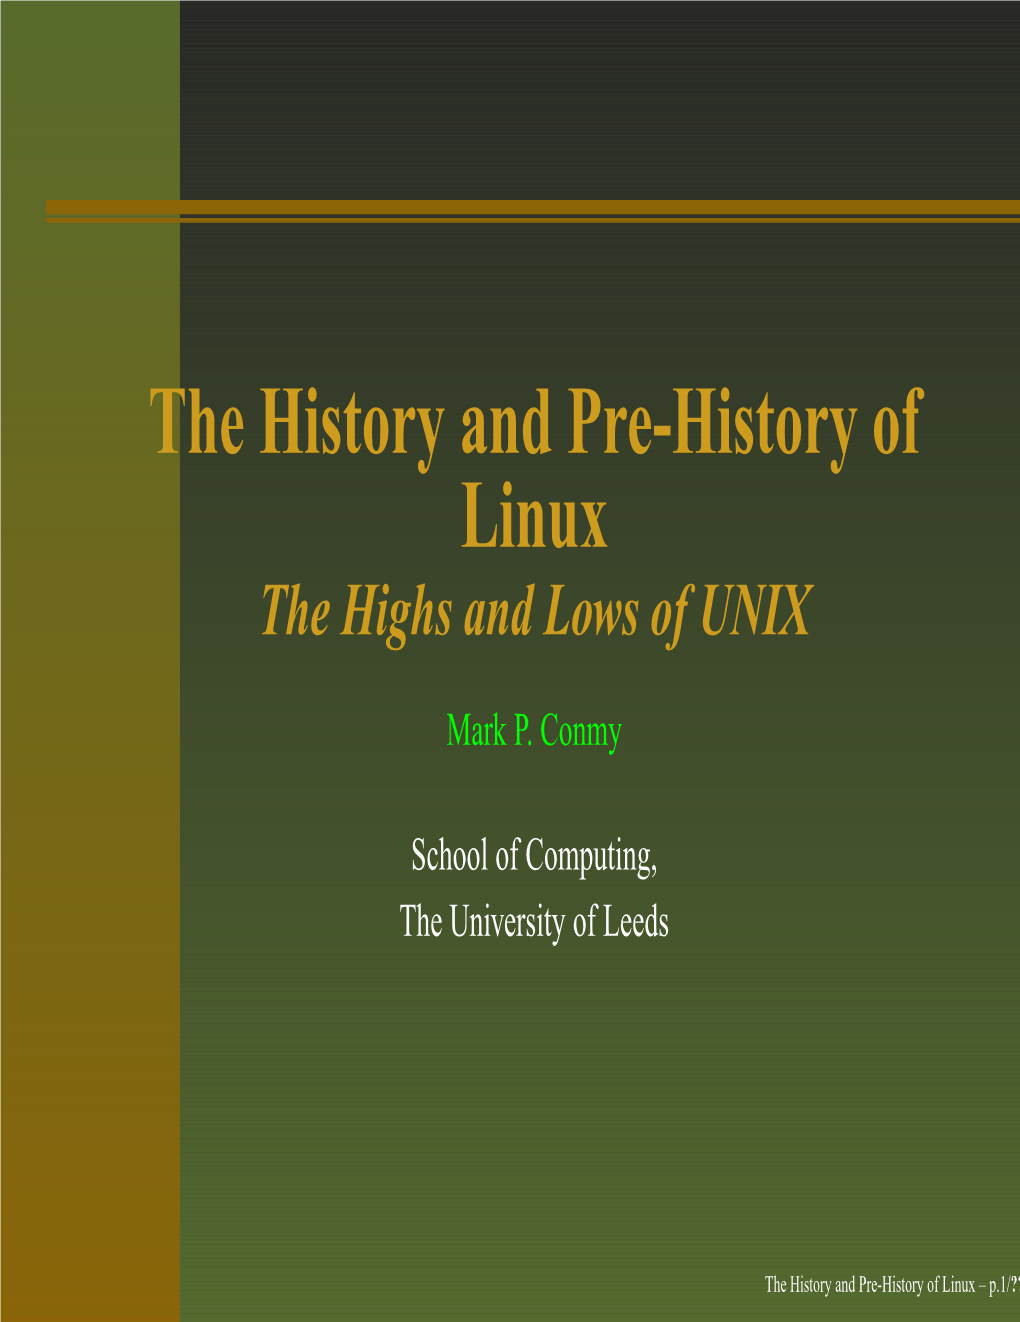 The History and Pre-History of Linux the Highs and Lows of UNIX